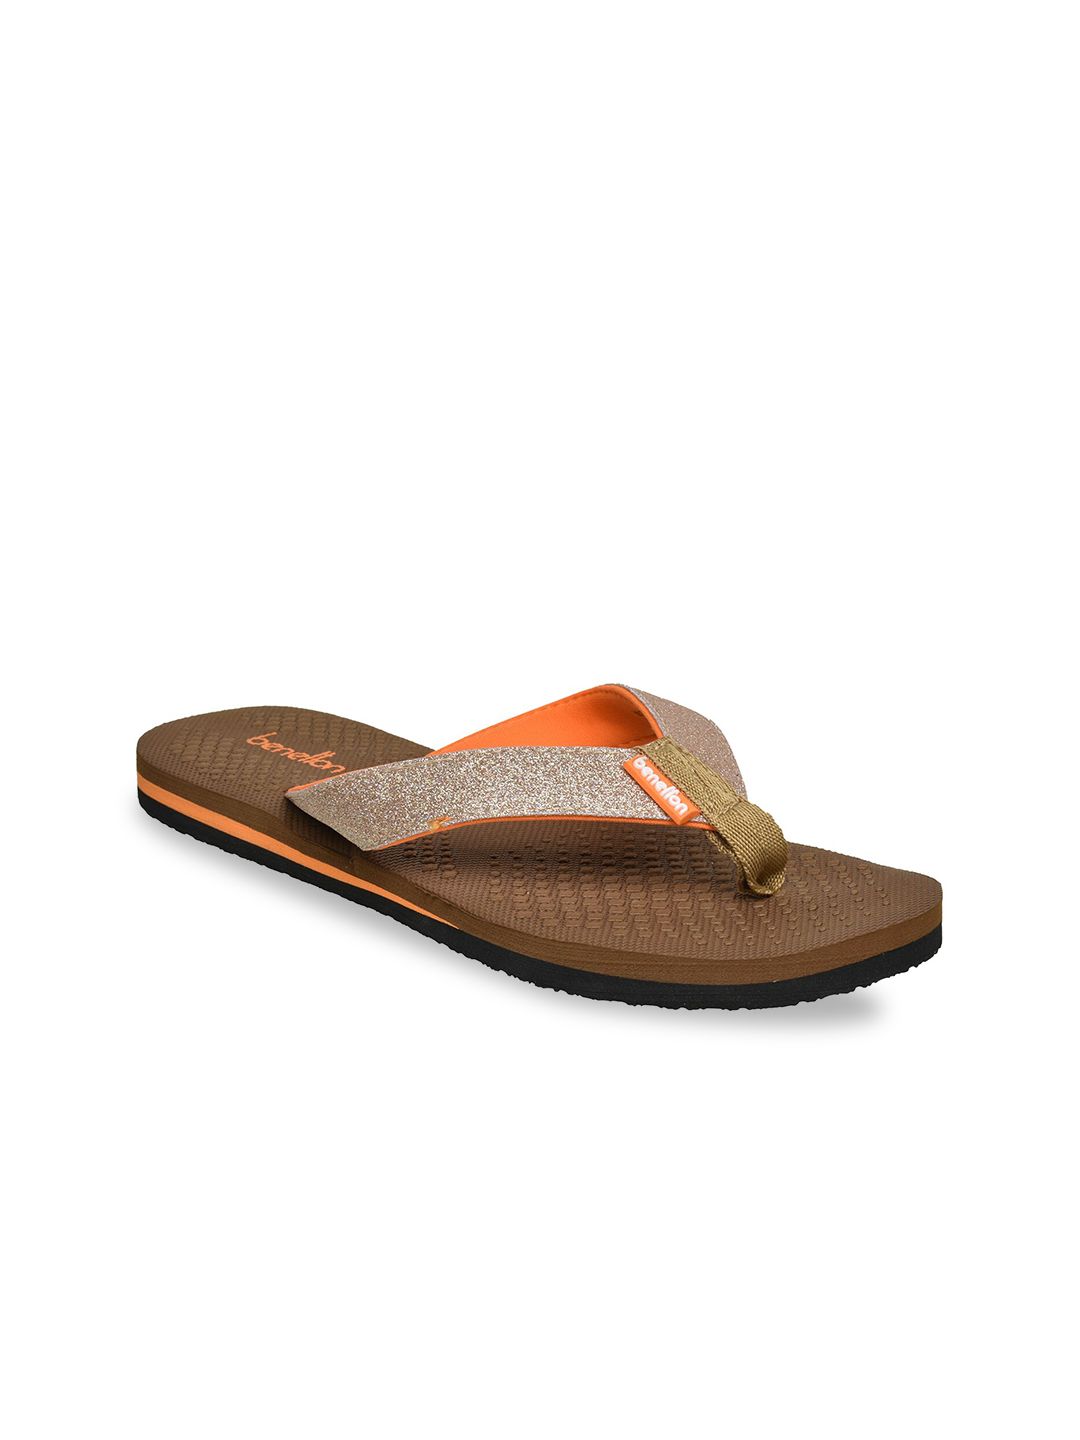 United Colors of Benetton Women Silver-Toned & Brown Rubber Thong Flip-Flops Price in India